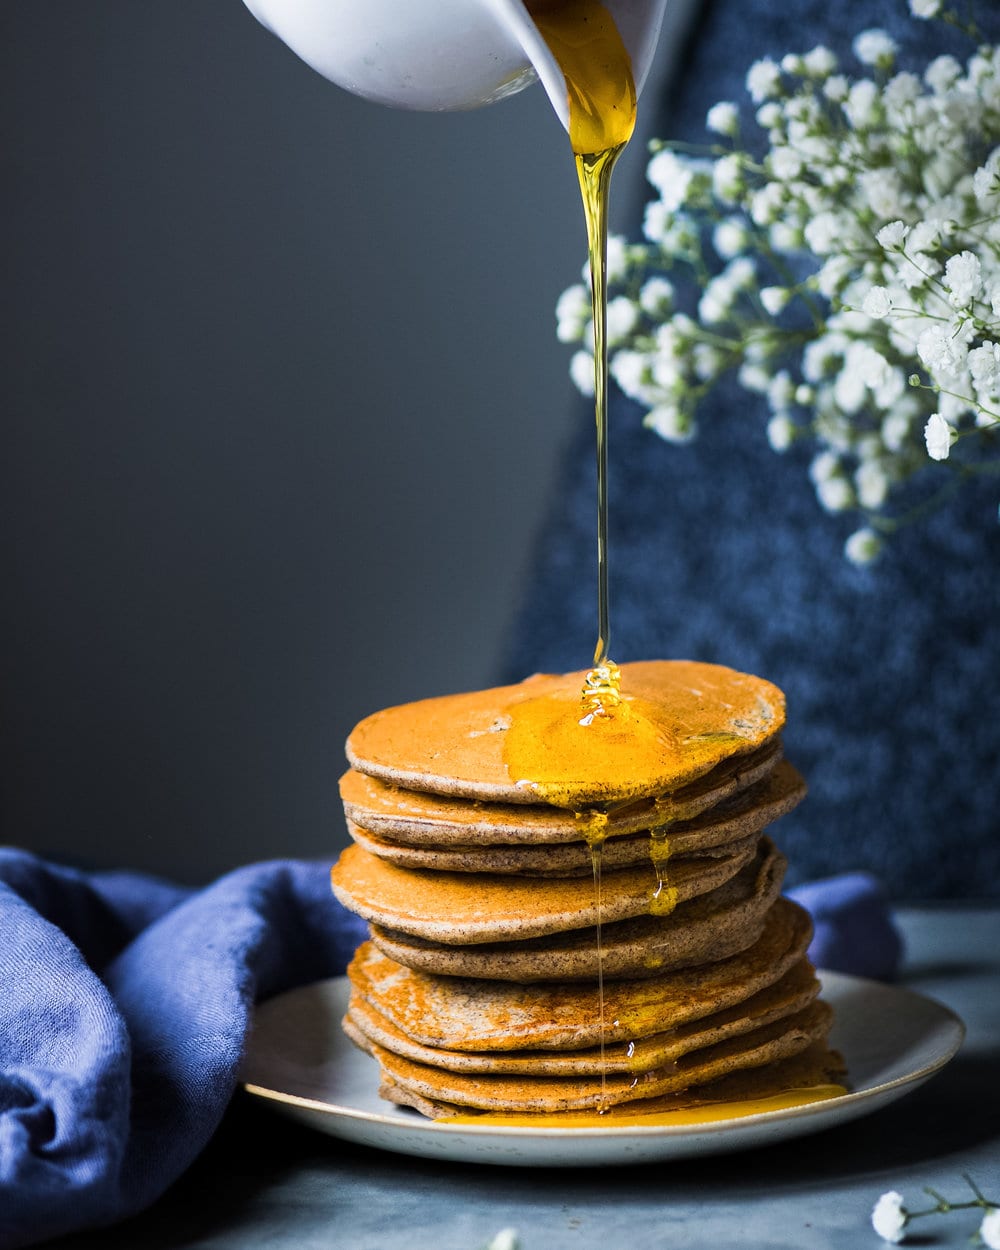 Maple syrup being poured onto tall stack of pancakes on a grey plate.